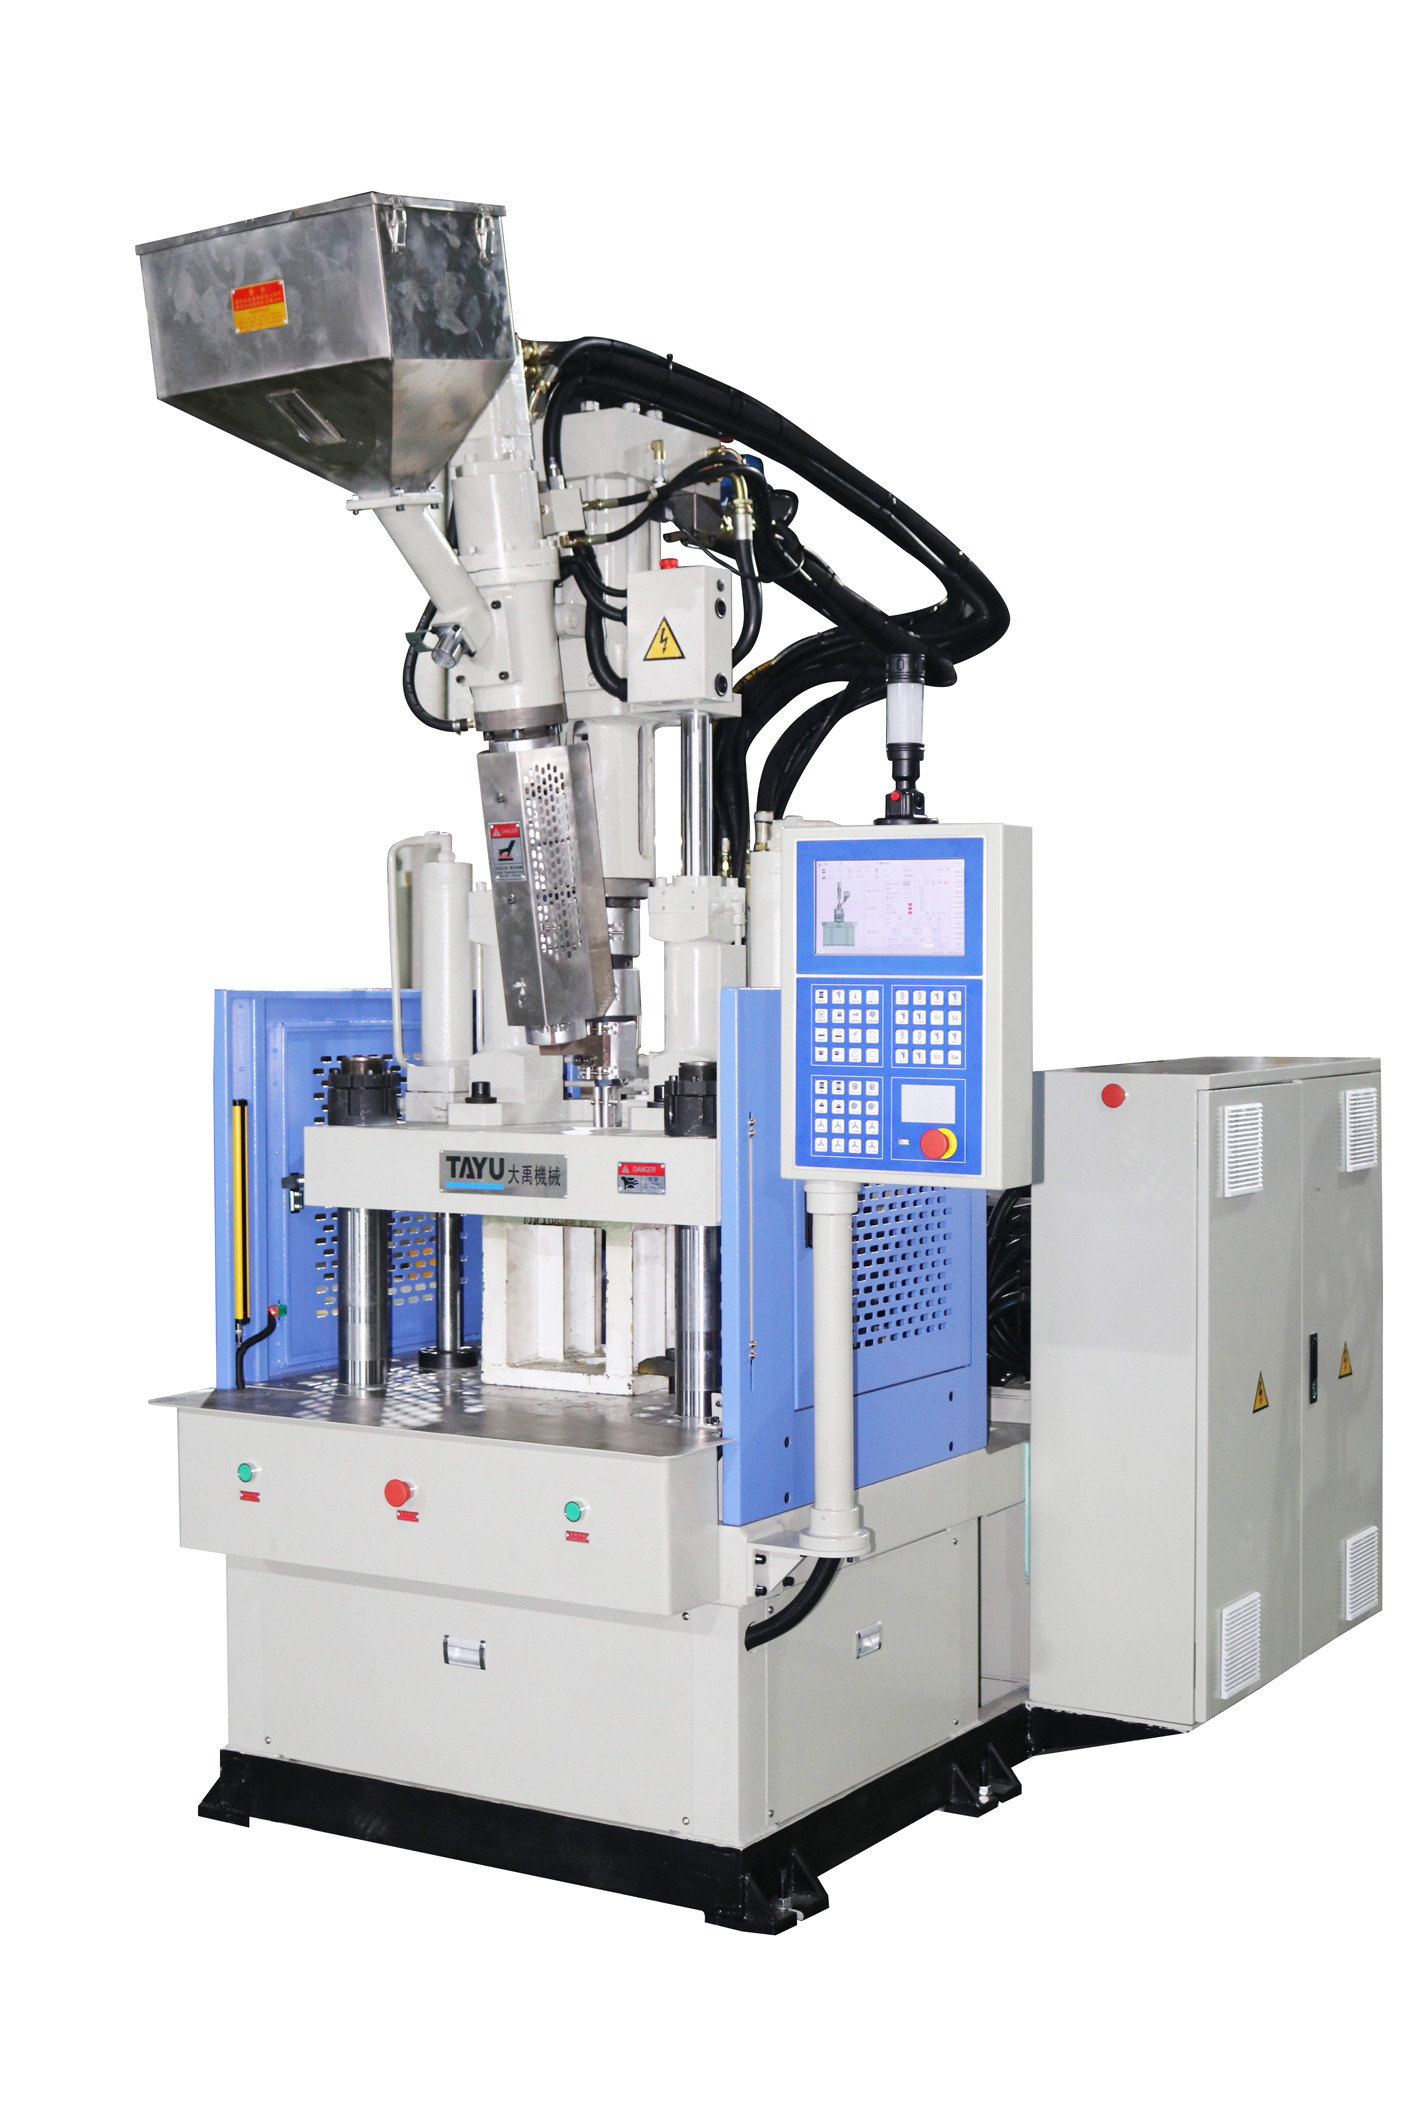 TYL-1000 vertical injection molding machine